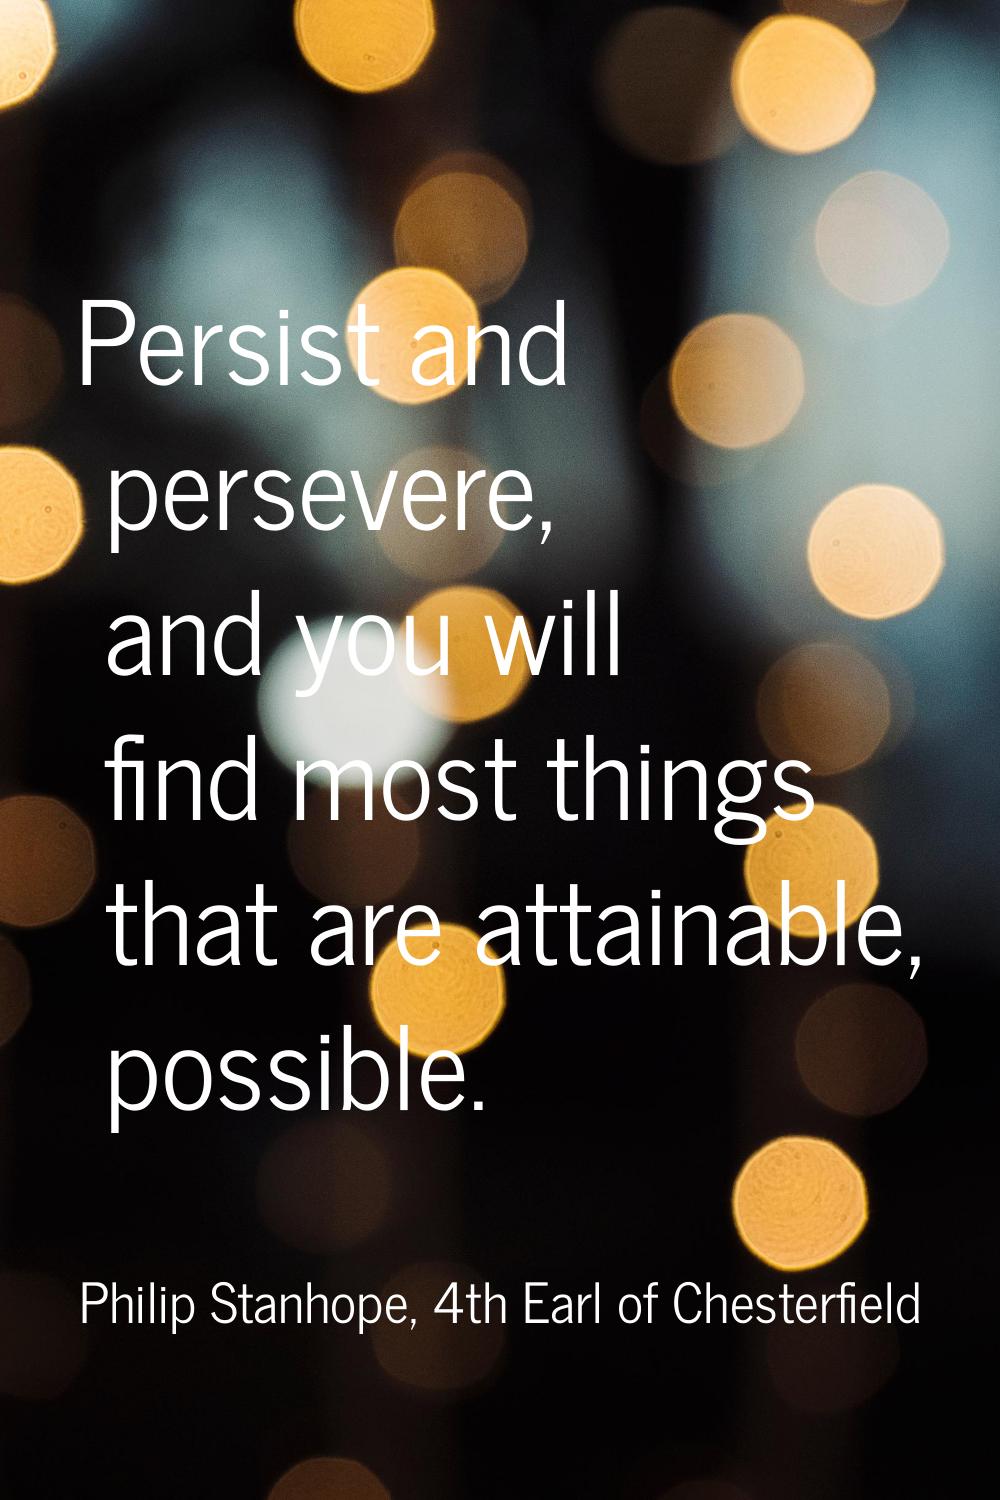 Persist and persevere, and you will find most things that are attainable, possible.